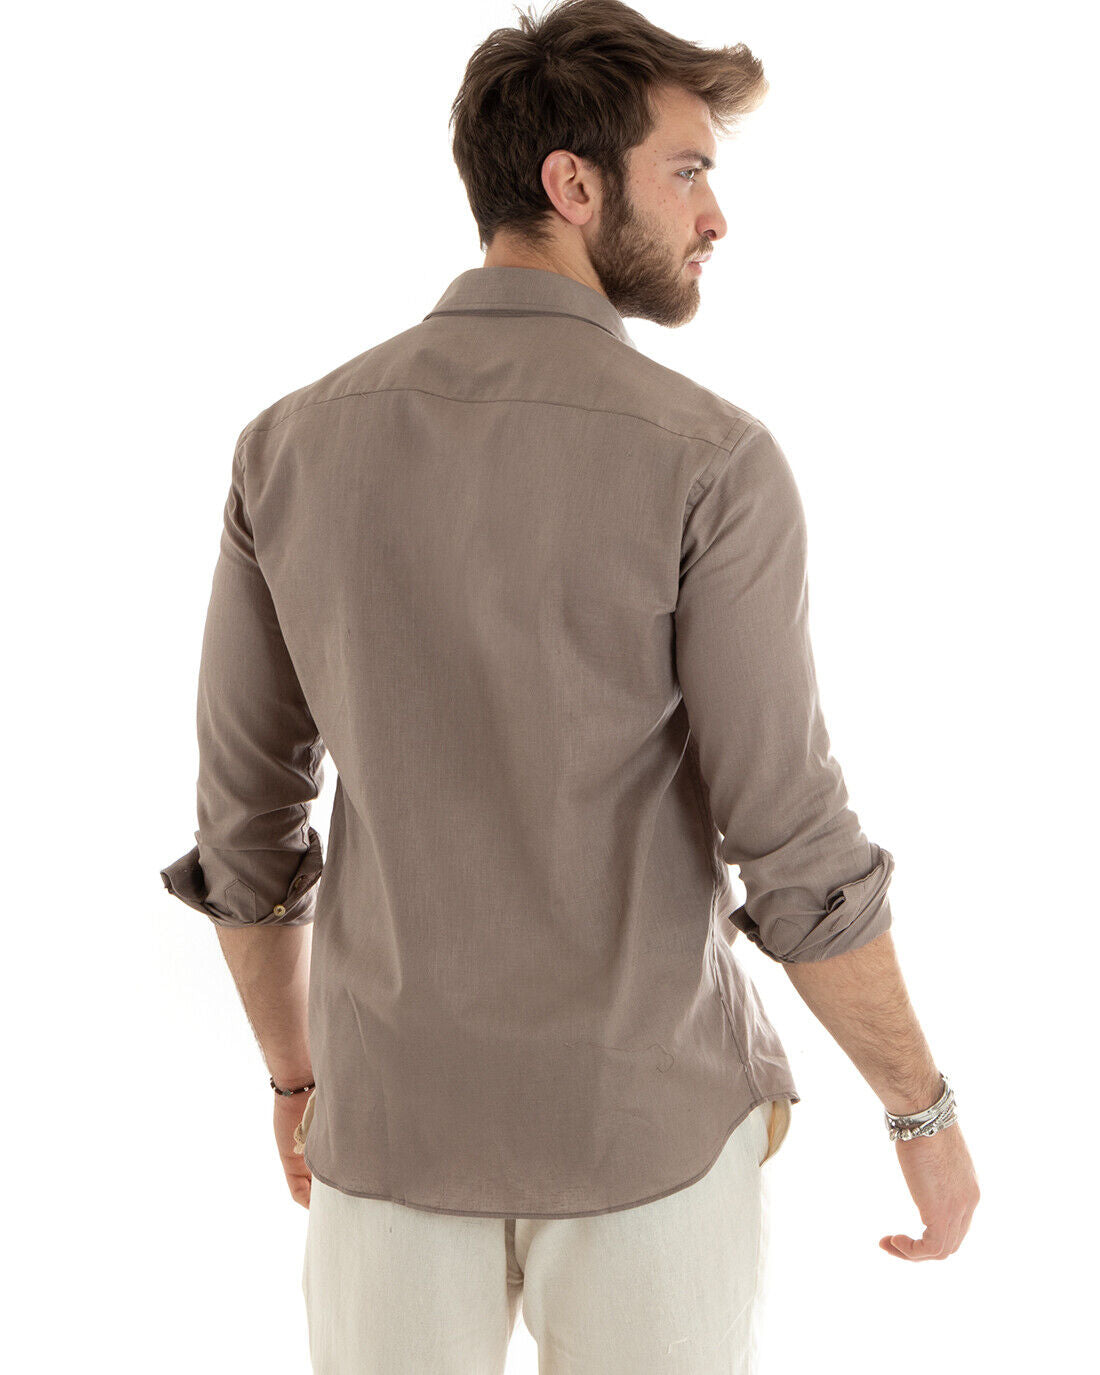 Men's Shirt With Collar Solid Color Mud Linen Long Sleeve Casual Tailored GIOSAL-C2714A